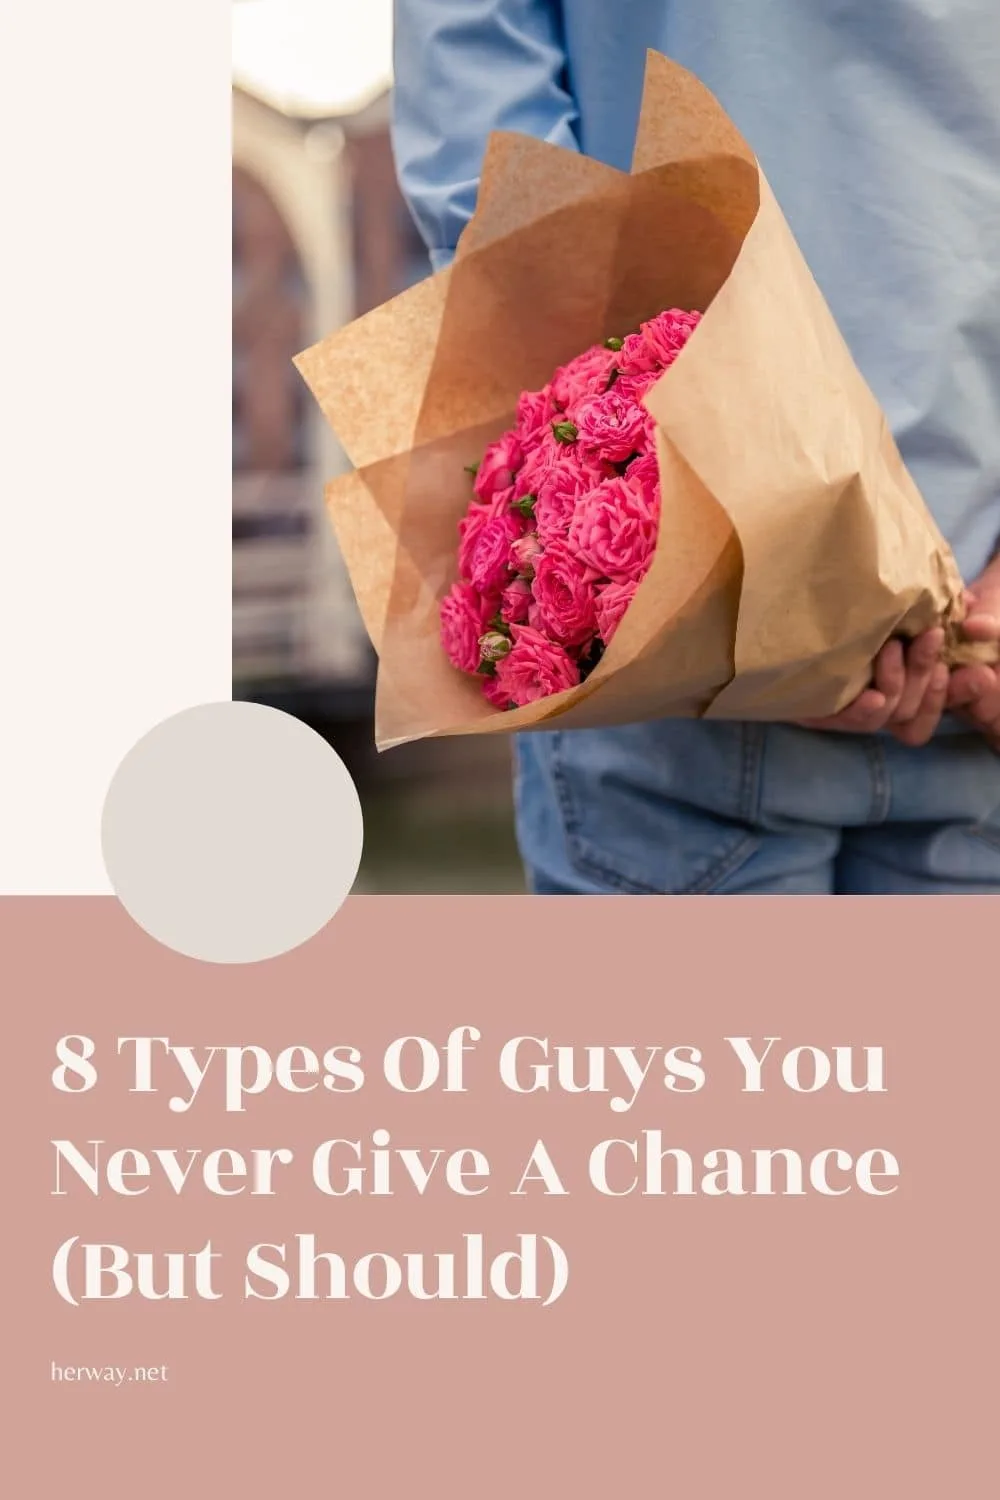 8 Types Of Guys You Never Give A Chance (But Should)